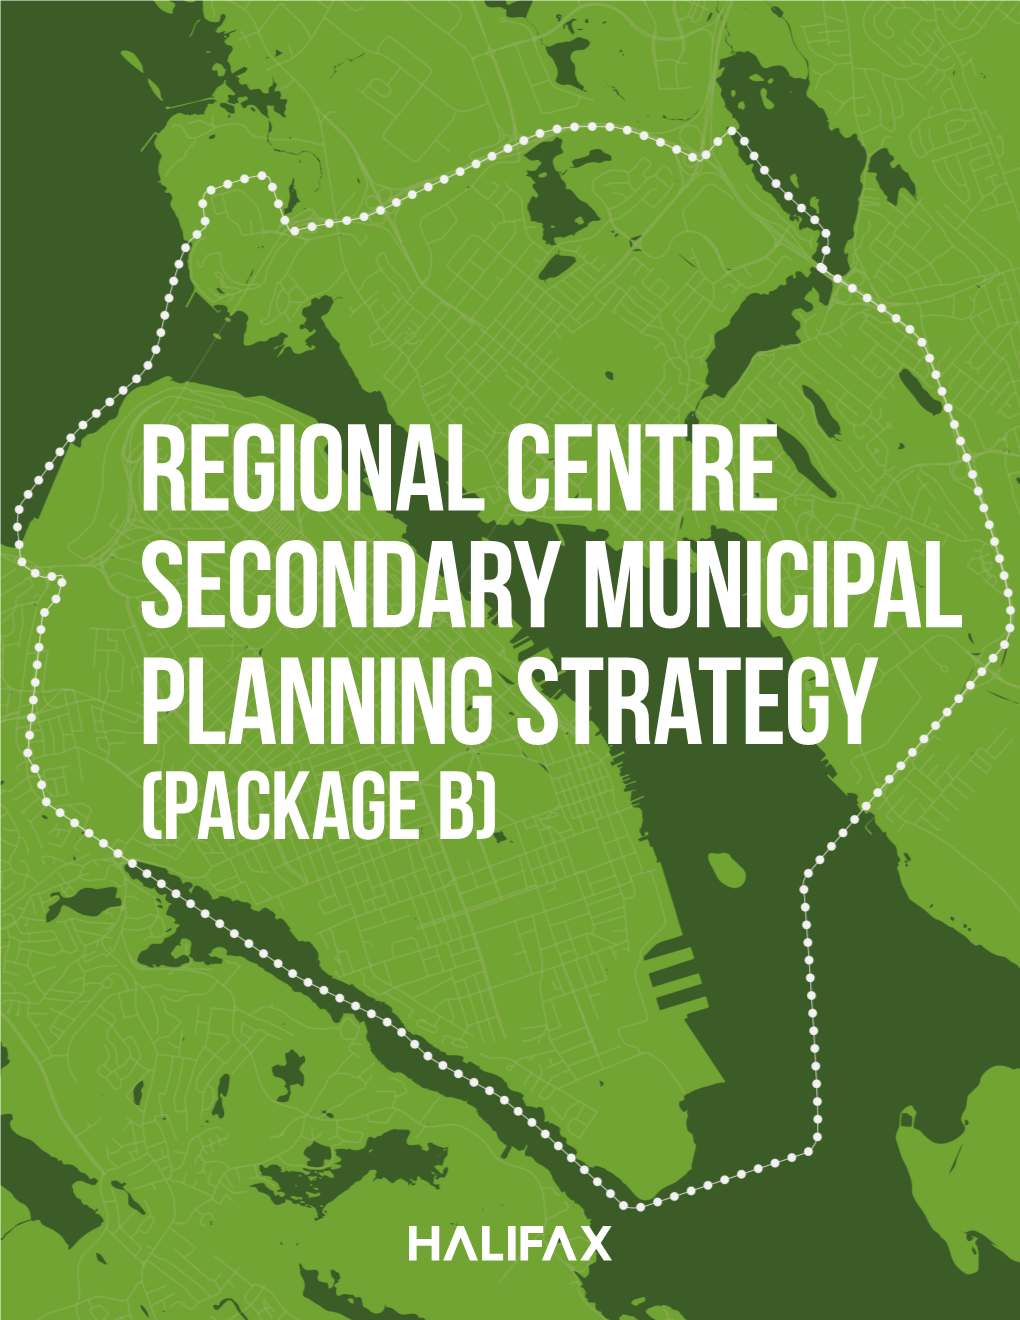 Centre Plan Package B